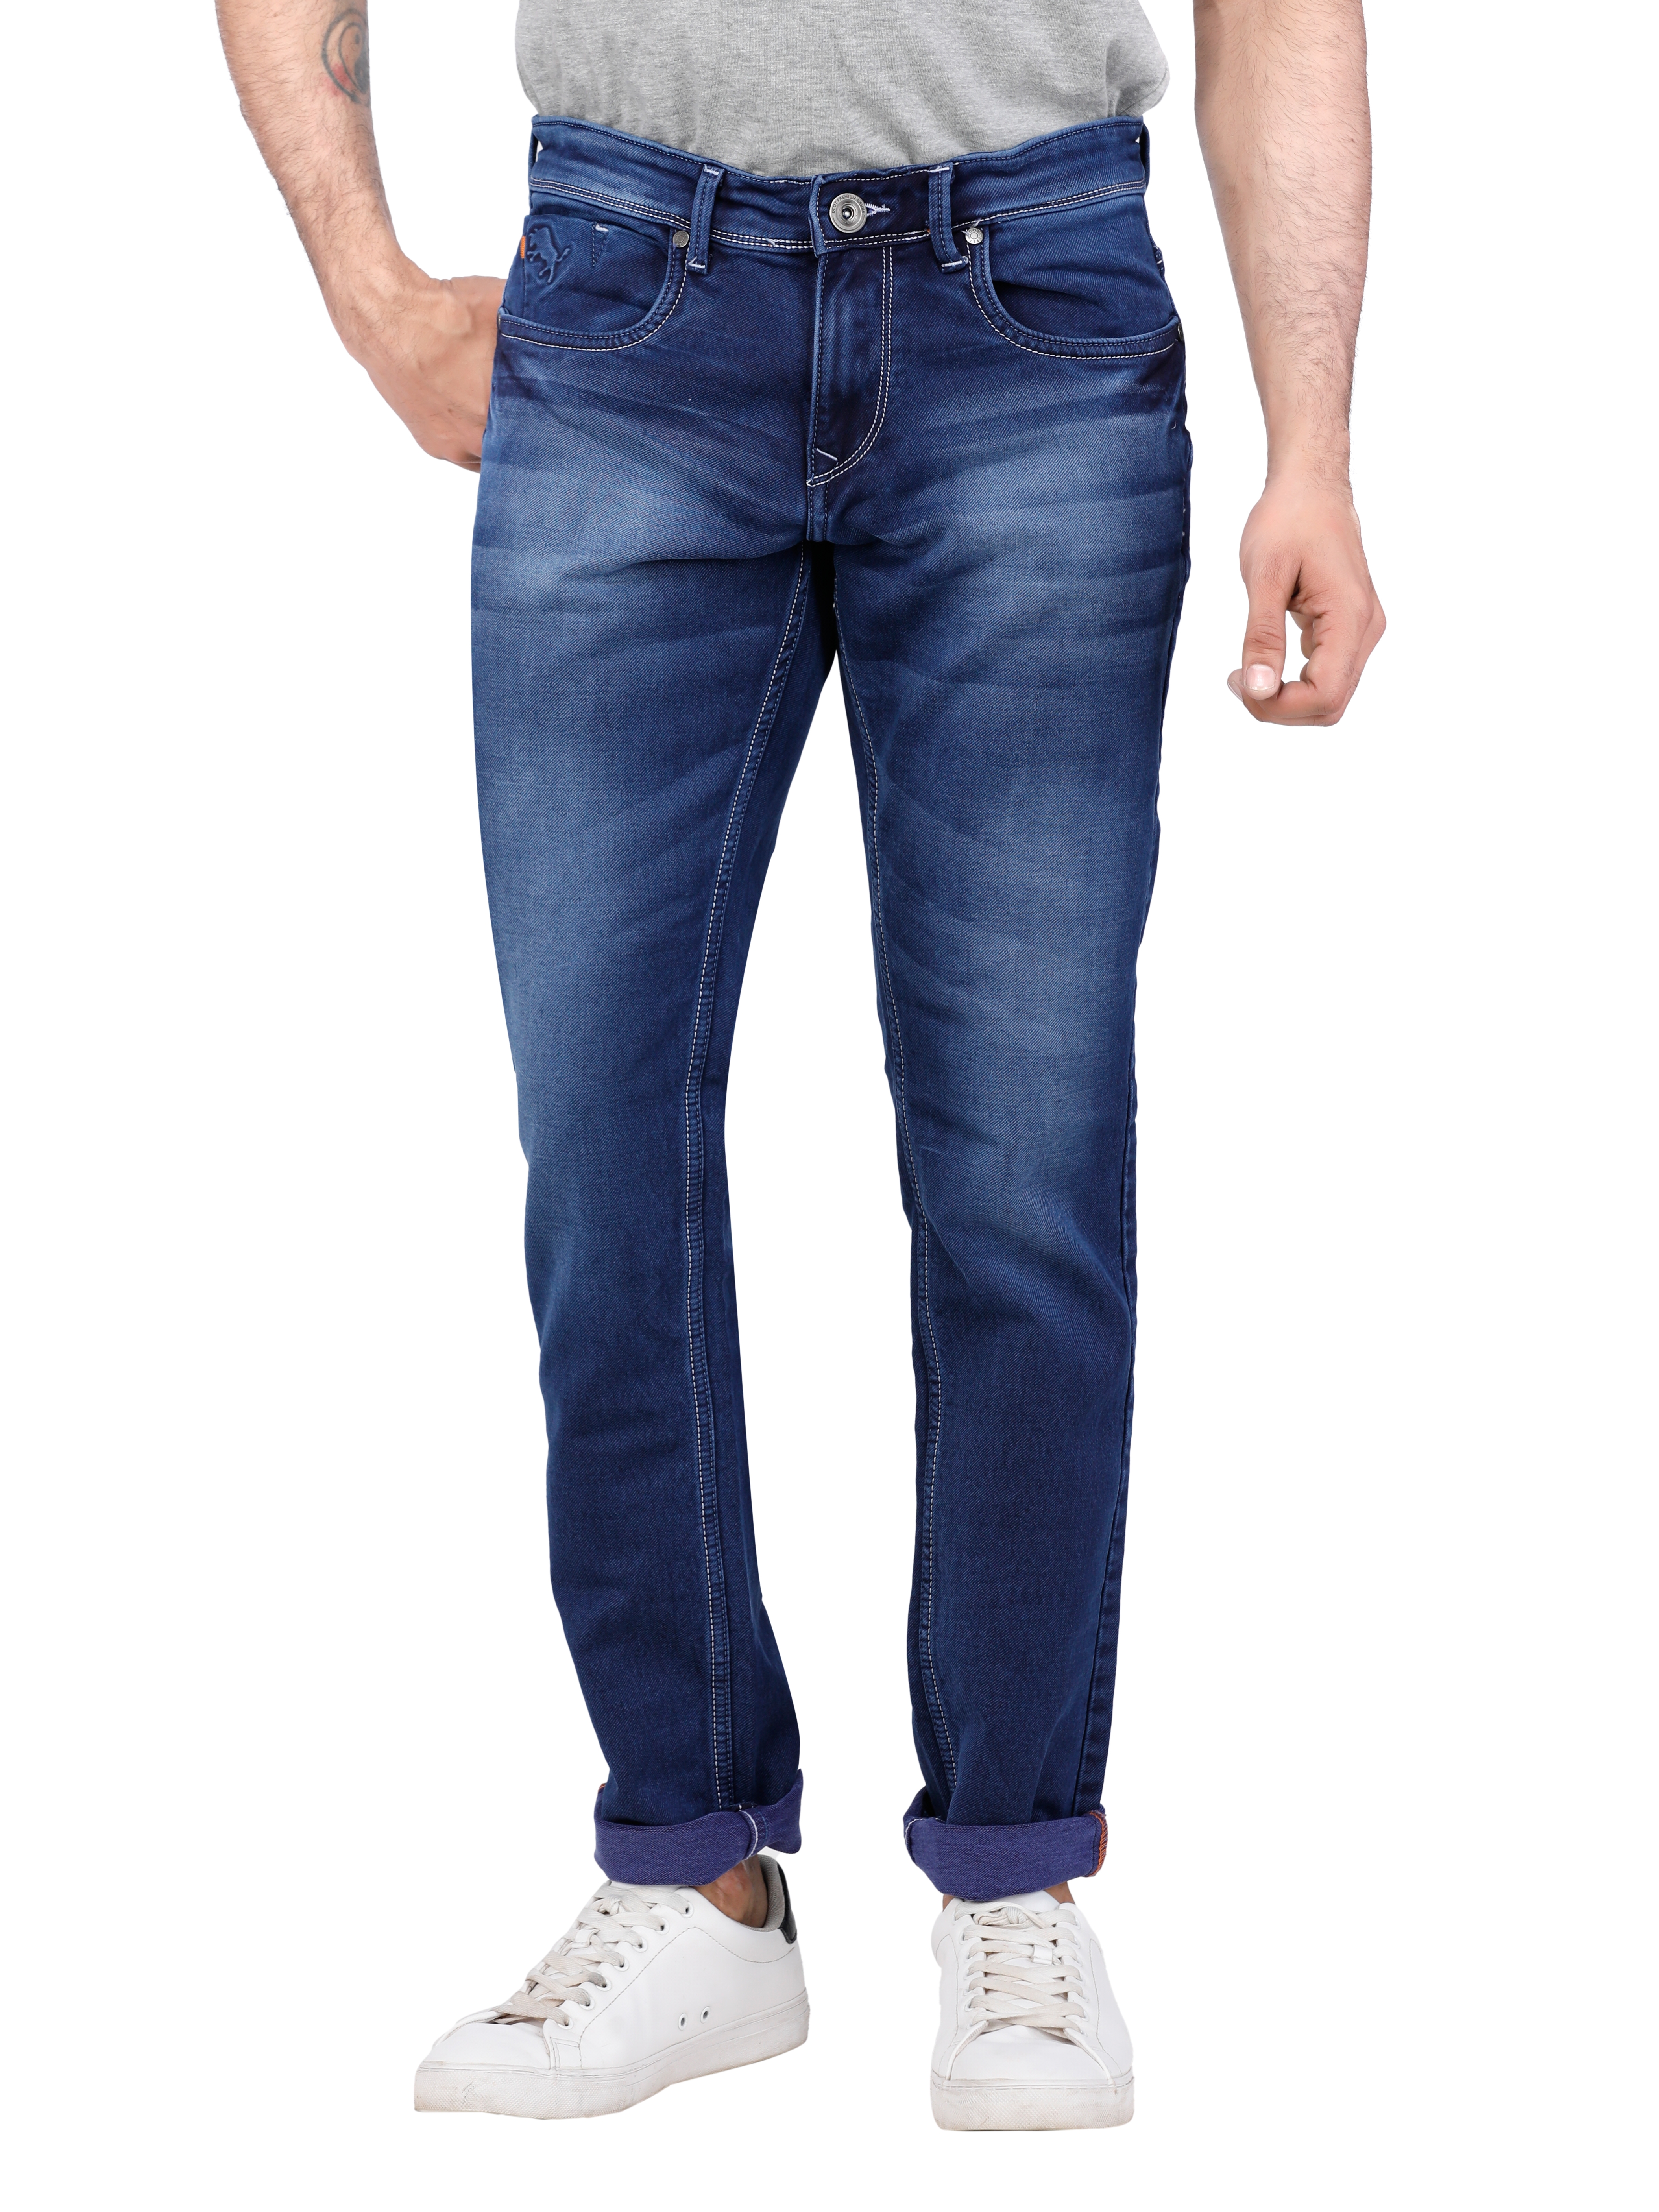 D'cot by Donear | D'cot by Donear Men Blue Cotton Slim Knitted Jeans